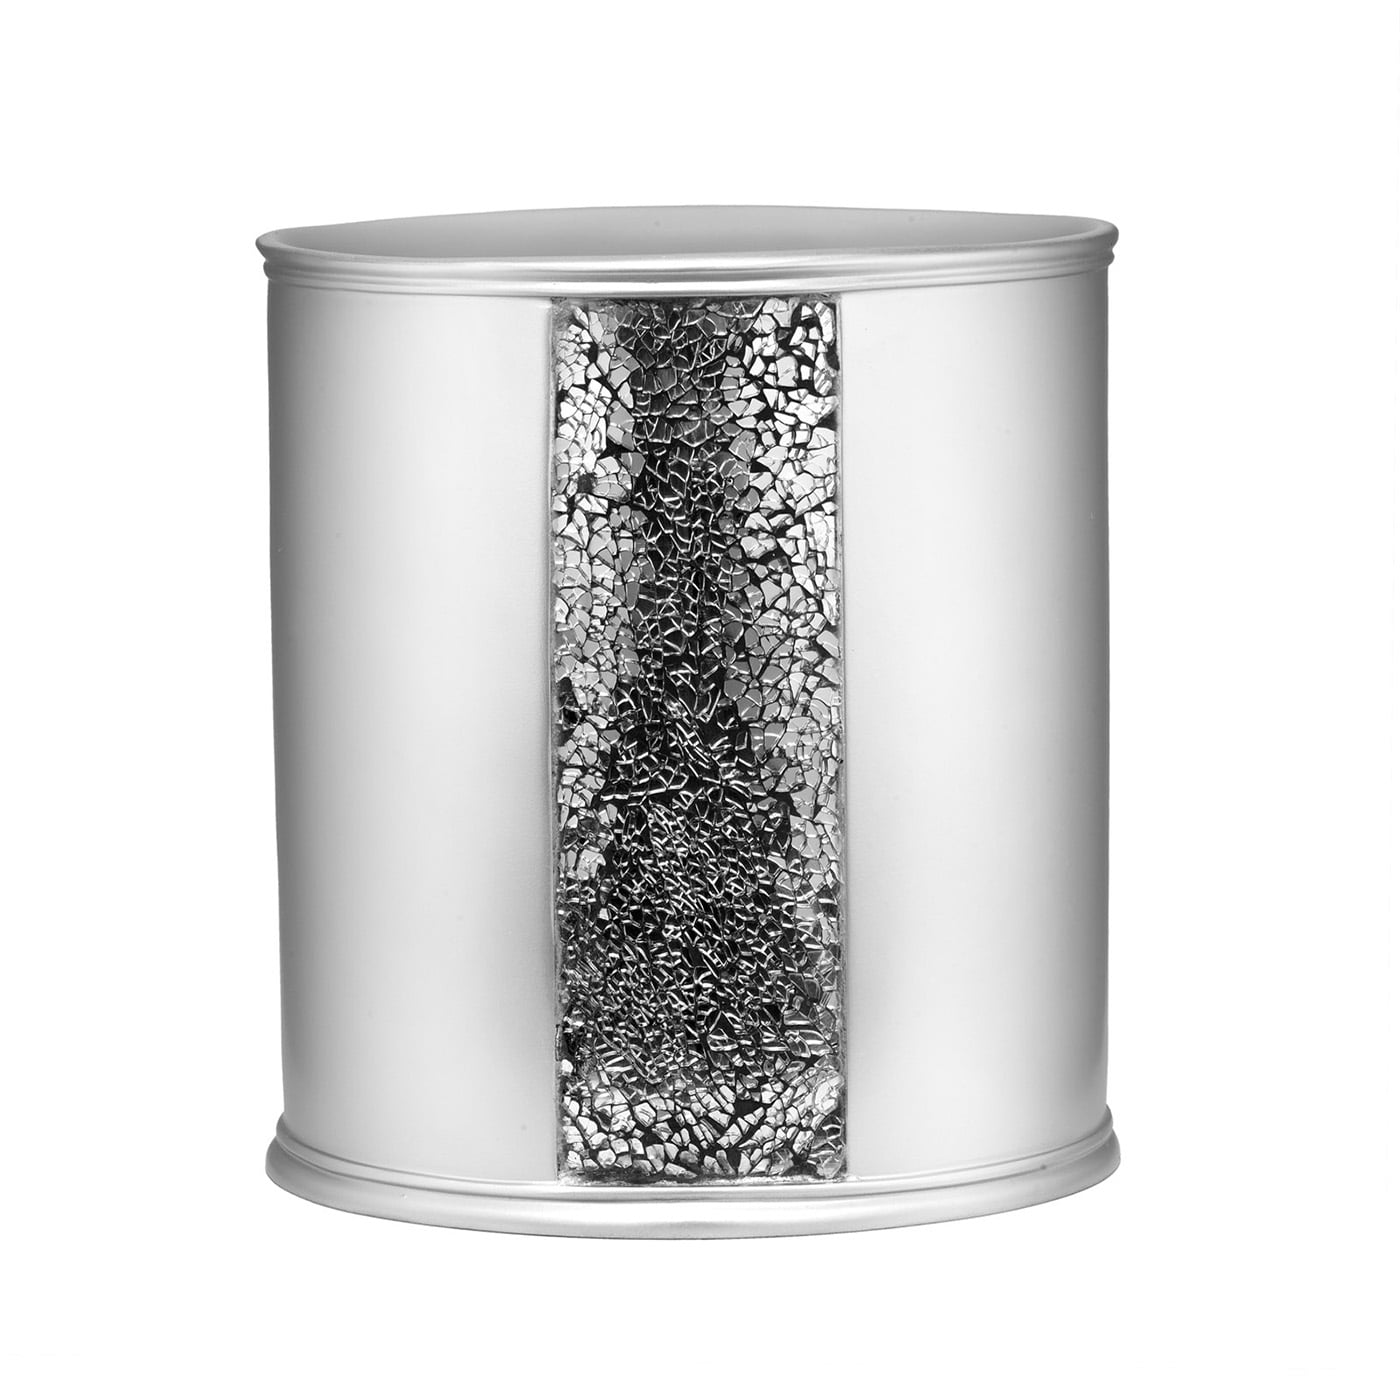 SILVER RESIN AND CRACKED ICE LOOK POPULAR BATH SINATRA TUMBLER 